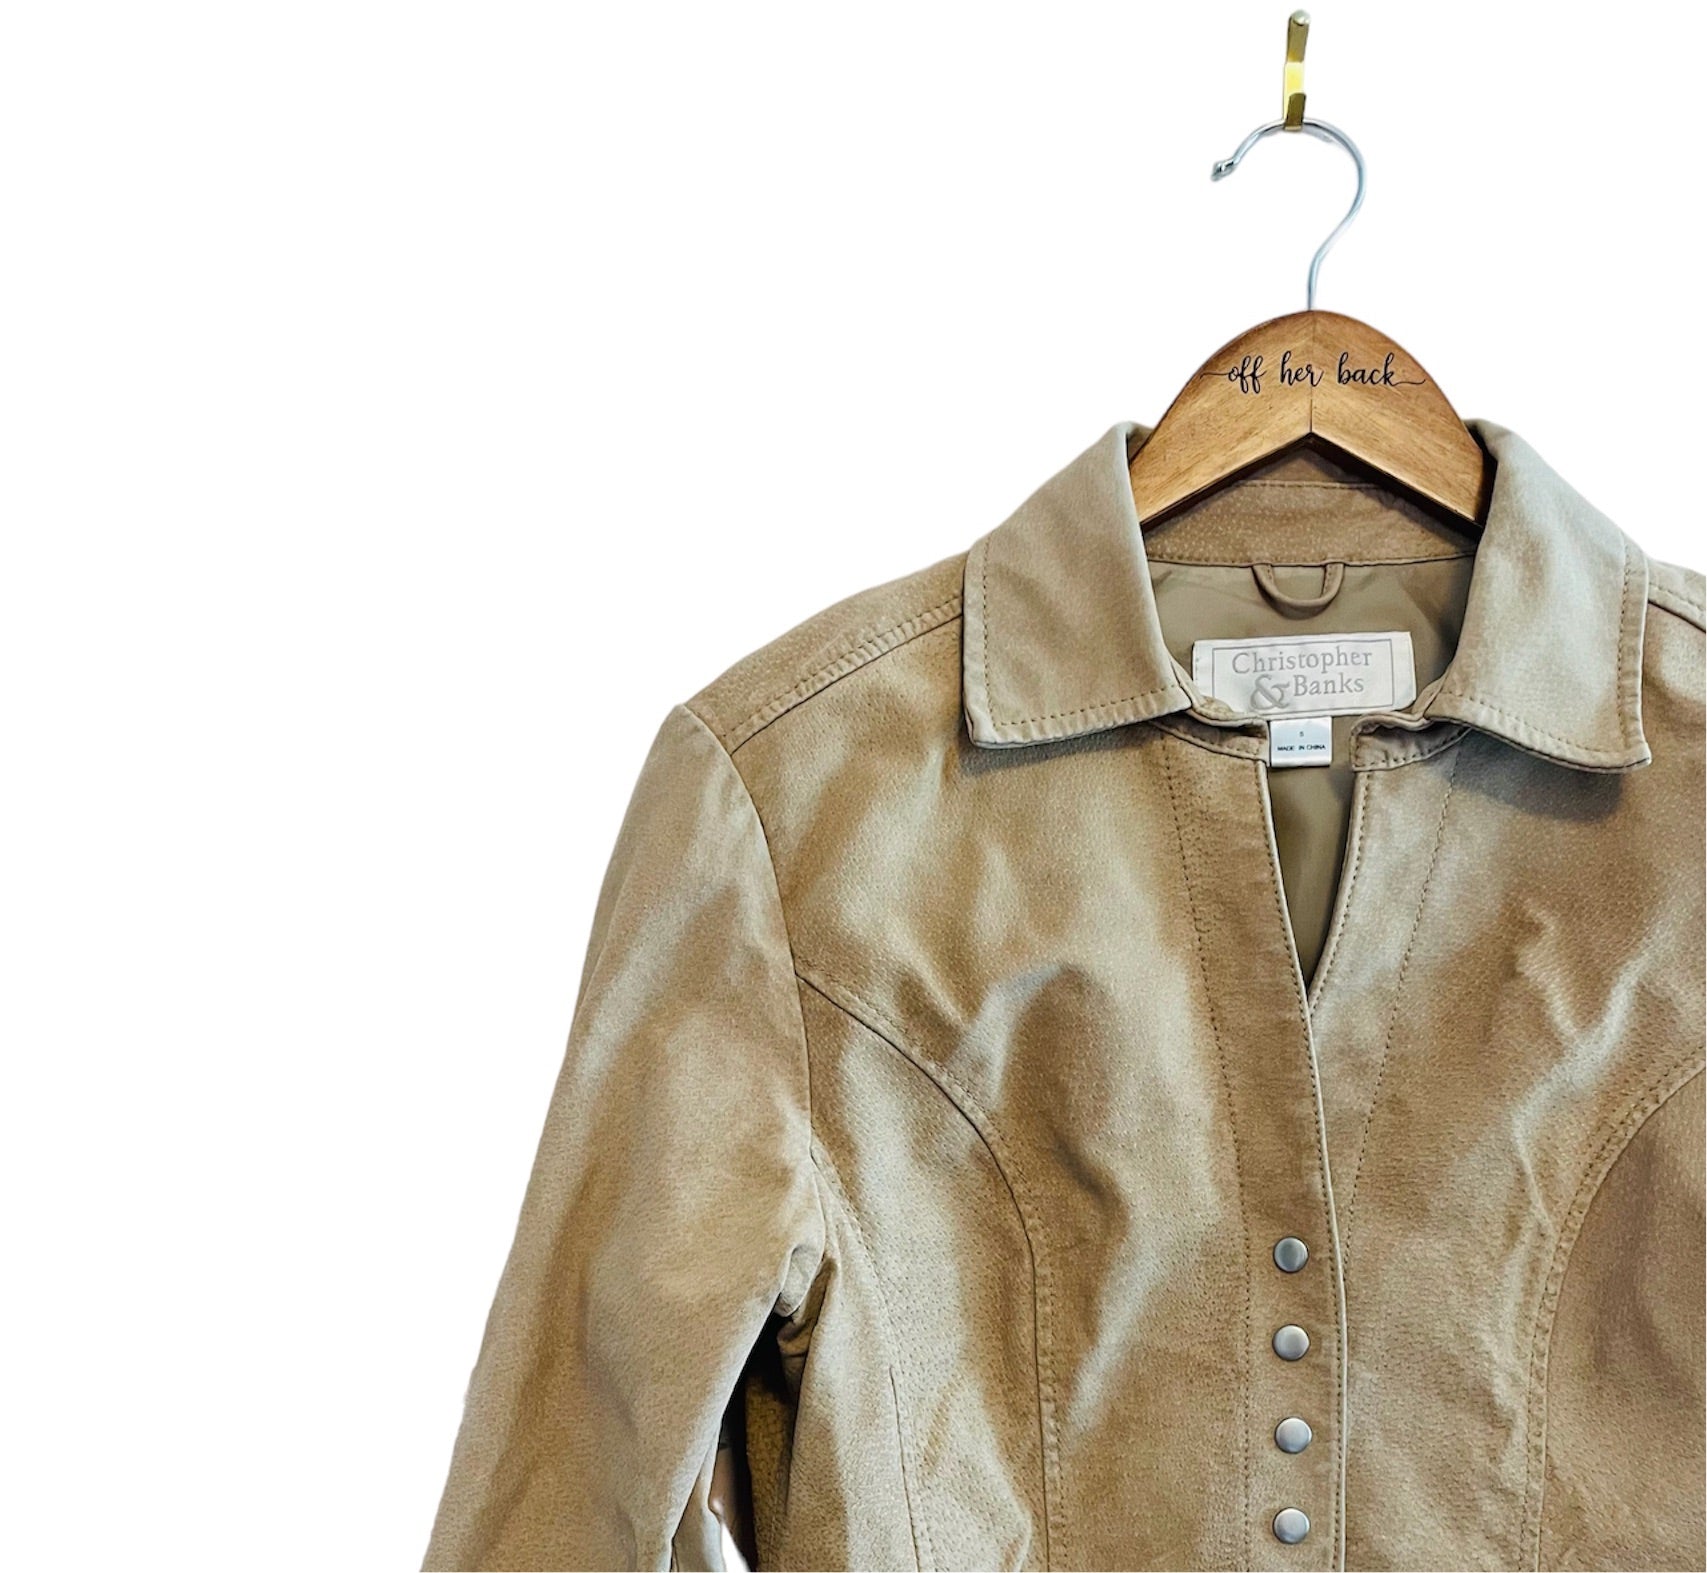 Tan Leather Button up Jacket Size: Small